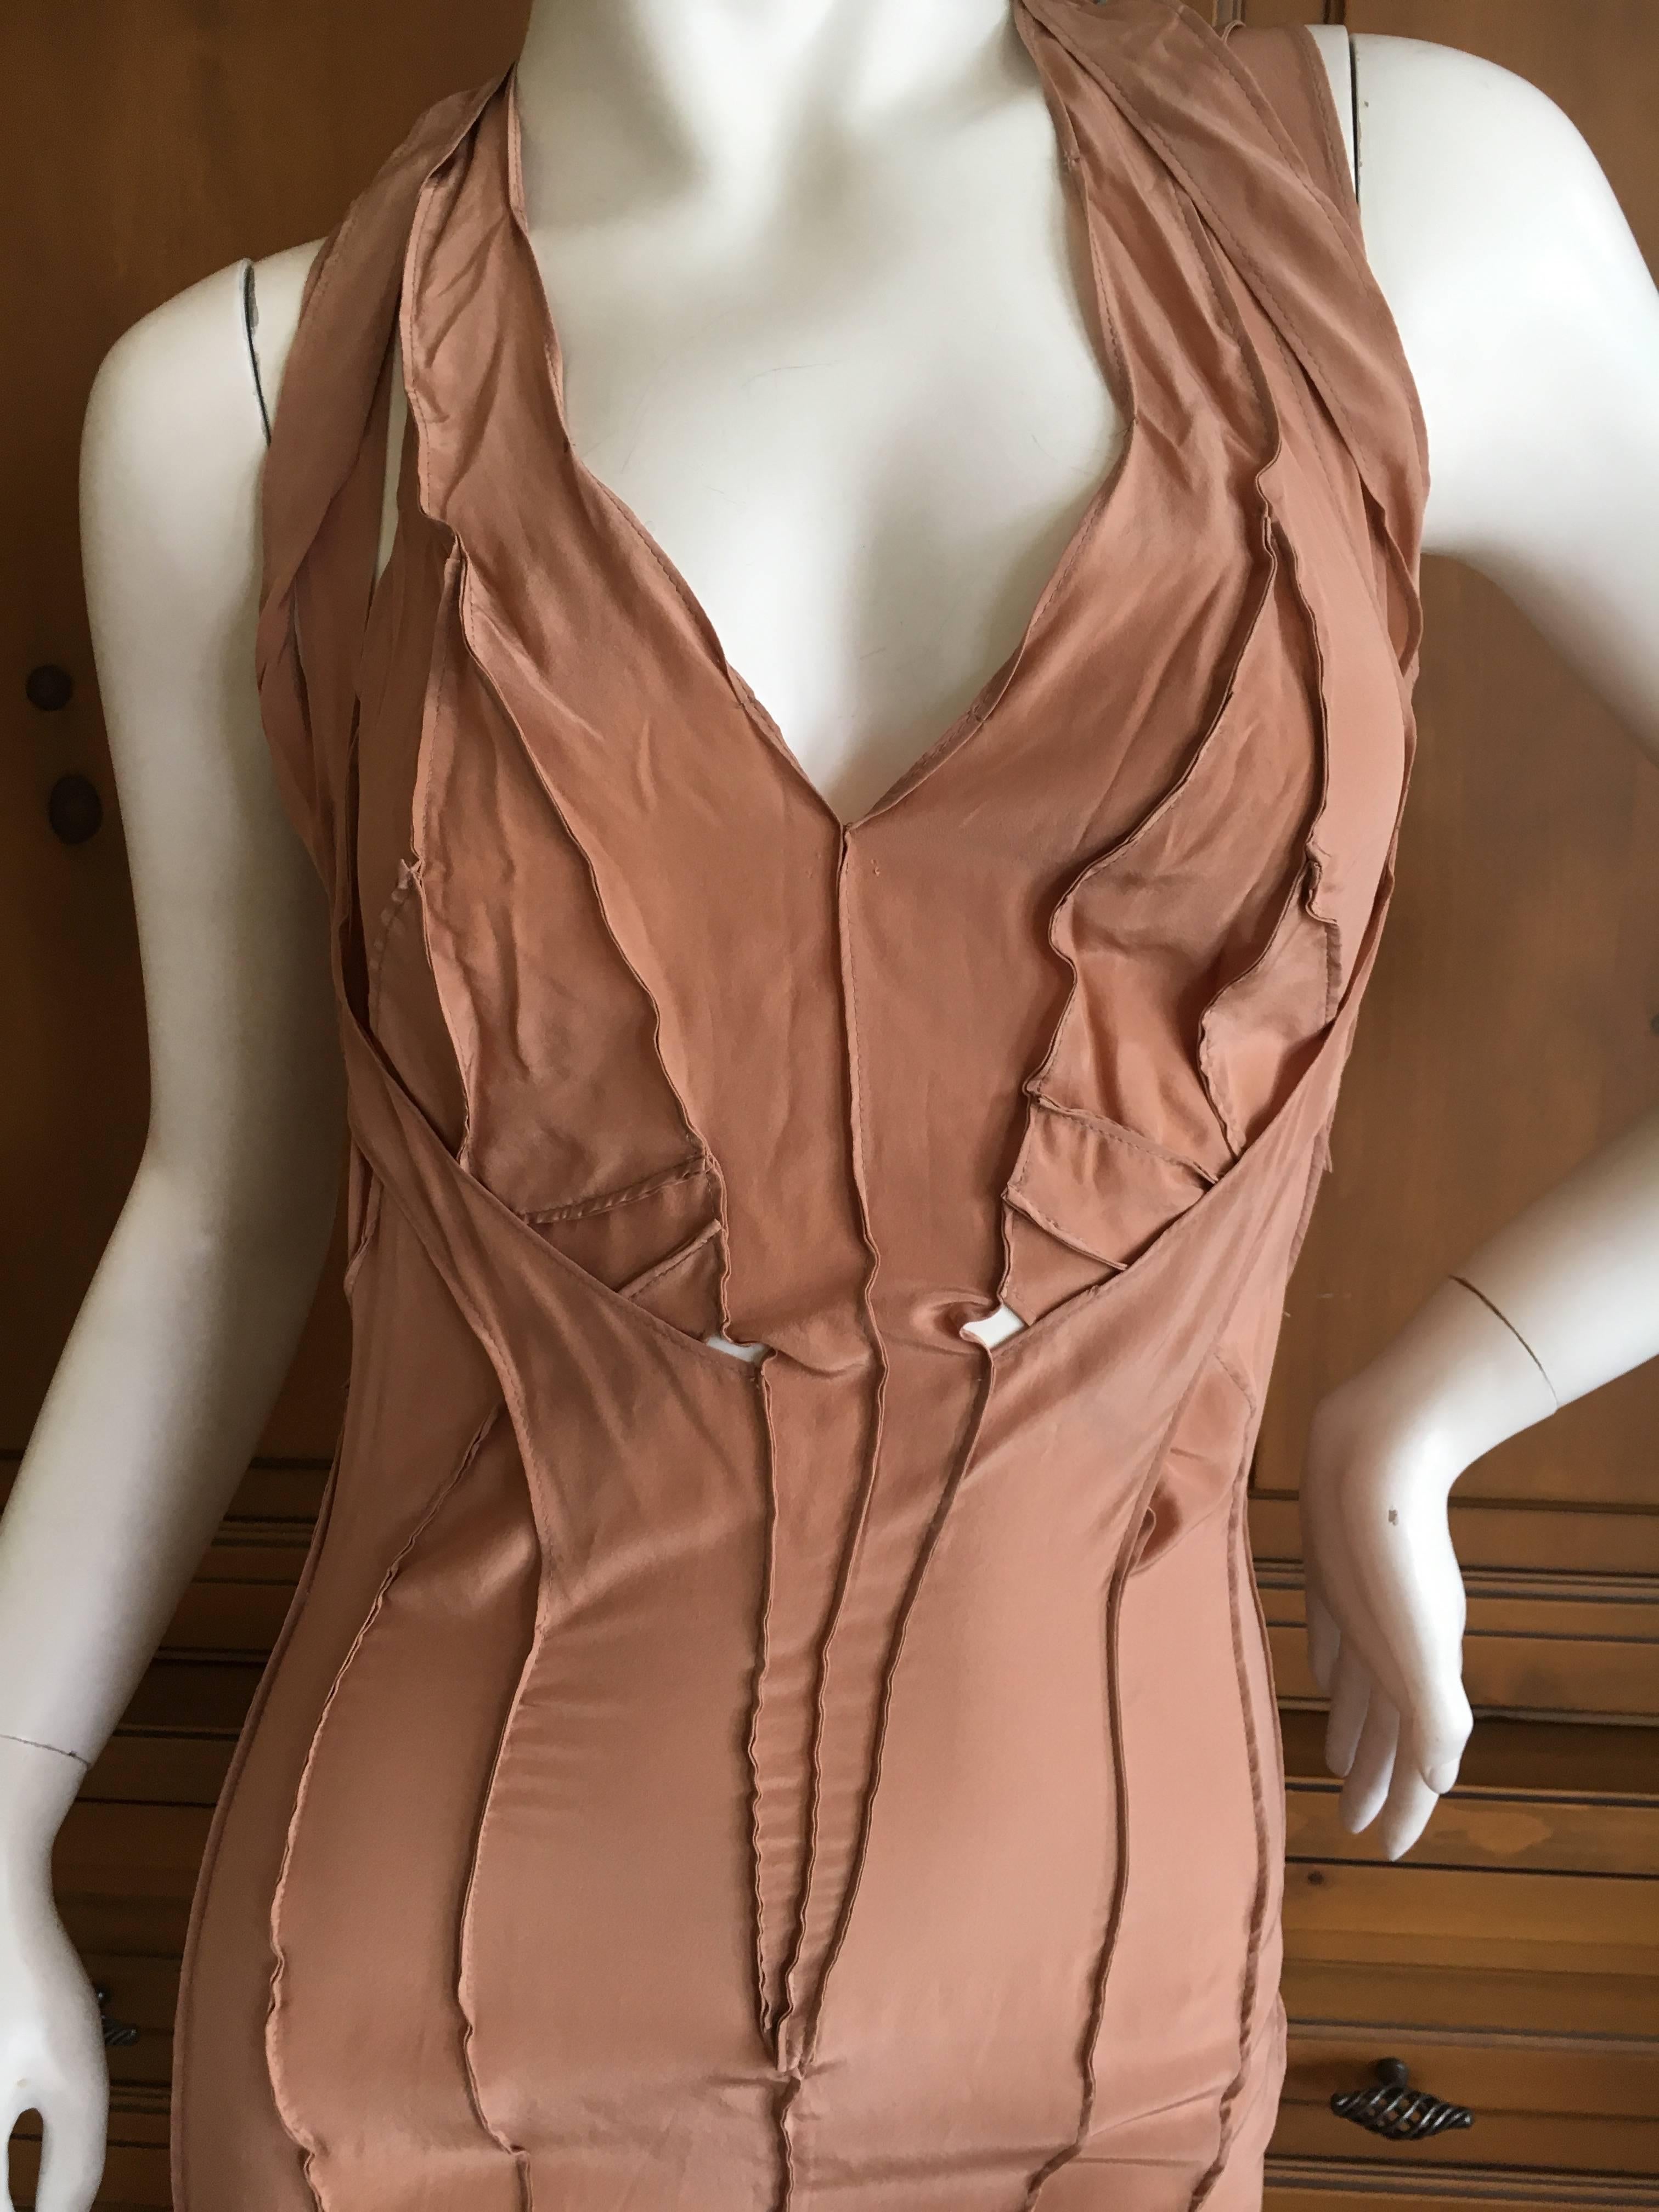 Yves Saint Laurent by Tom Ford 2002 Silk Dress 
Size 36
Bust 36